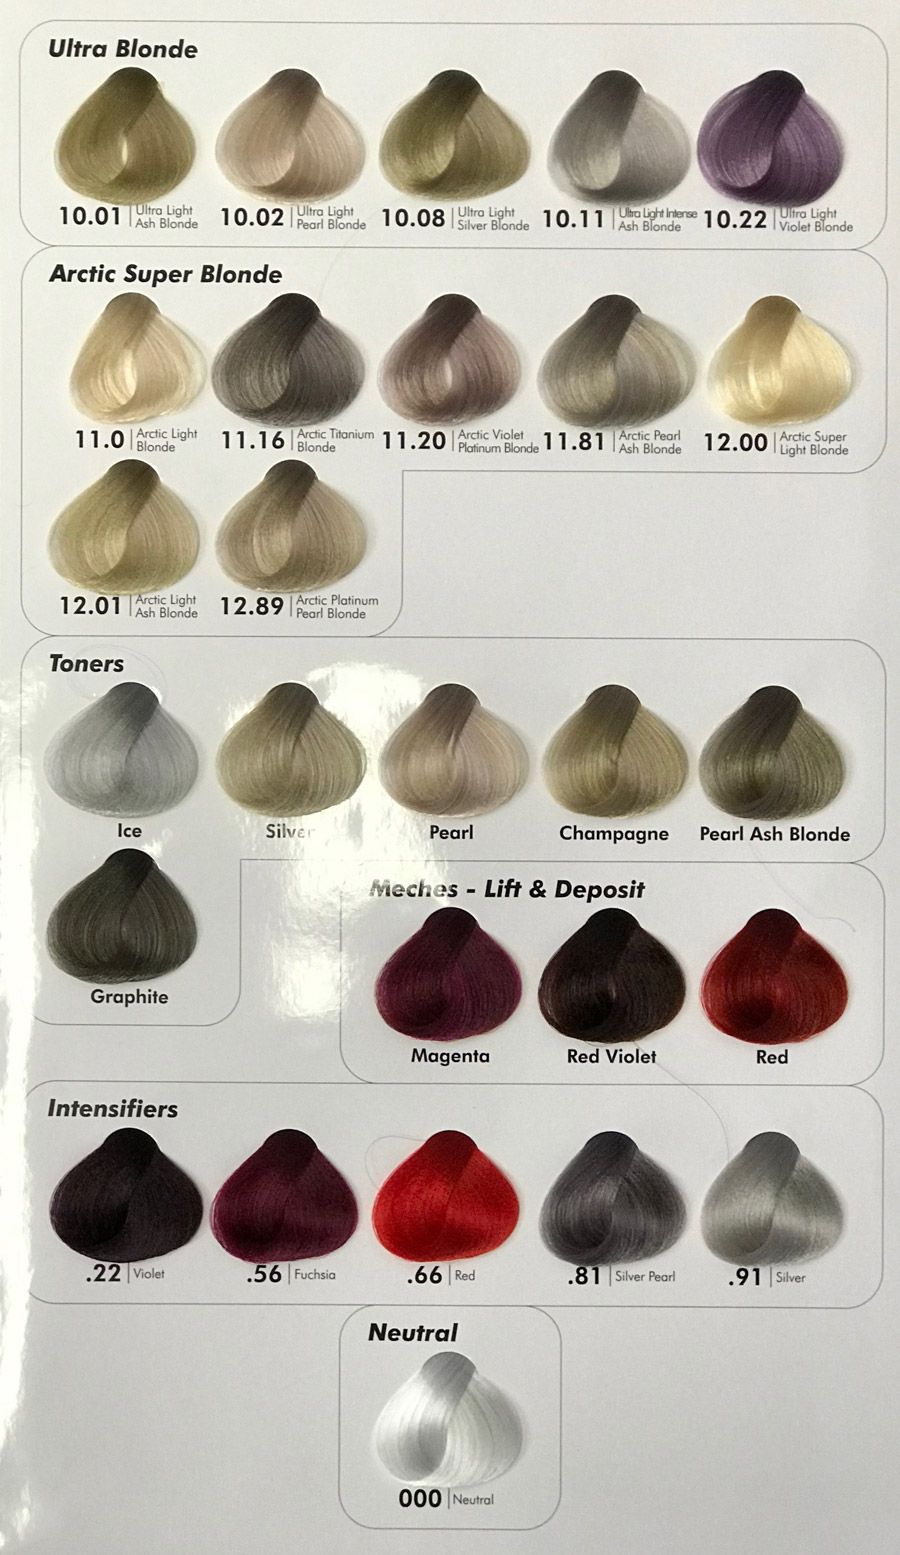 Hair colour chart by Cristalli featuring ultra blonde, artic super blonde, toners and intensifiers..